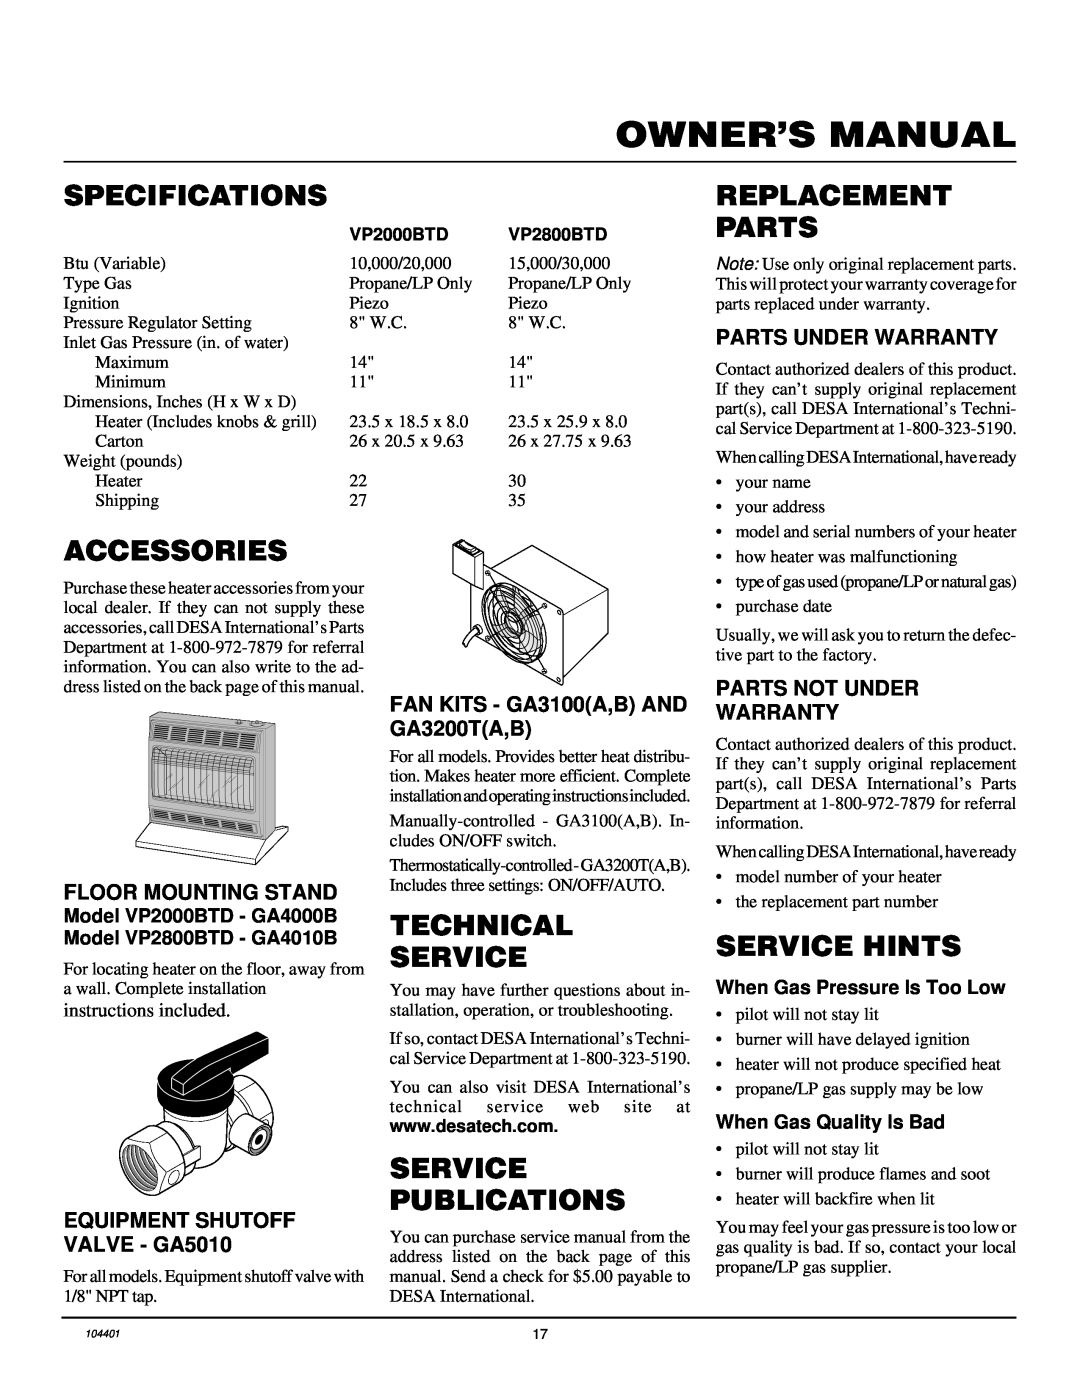 Vanguard Heating VP2000BTD Specifications, Replacement Parts, Accessories, Technical Service, Service Publications 